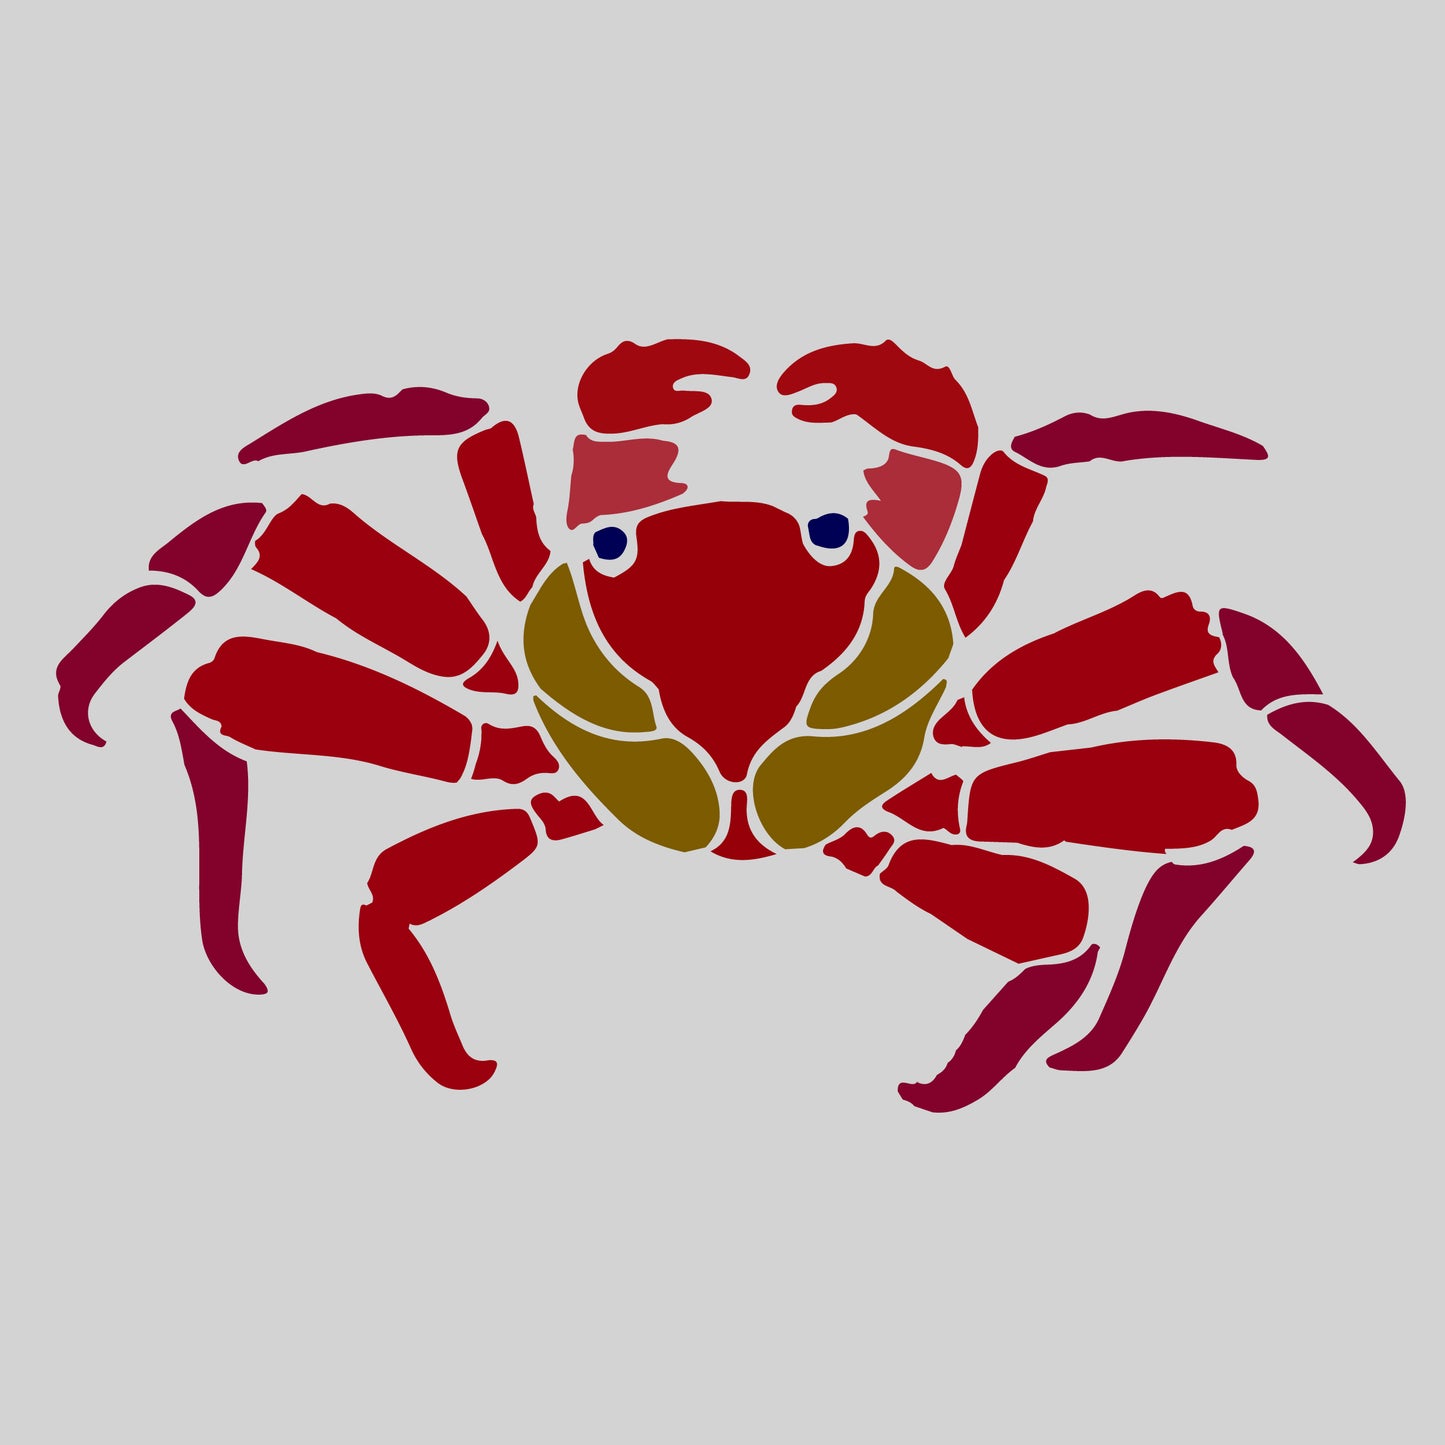 Delight Crab Design Stencil for Wall Painting (KDMD1485)